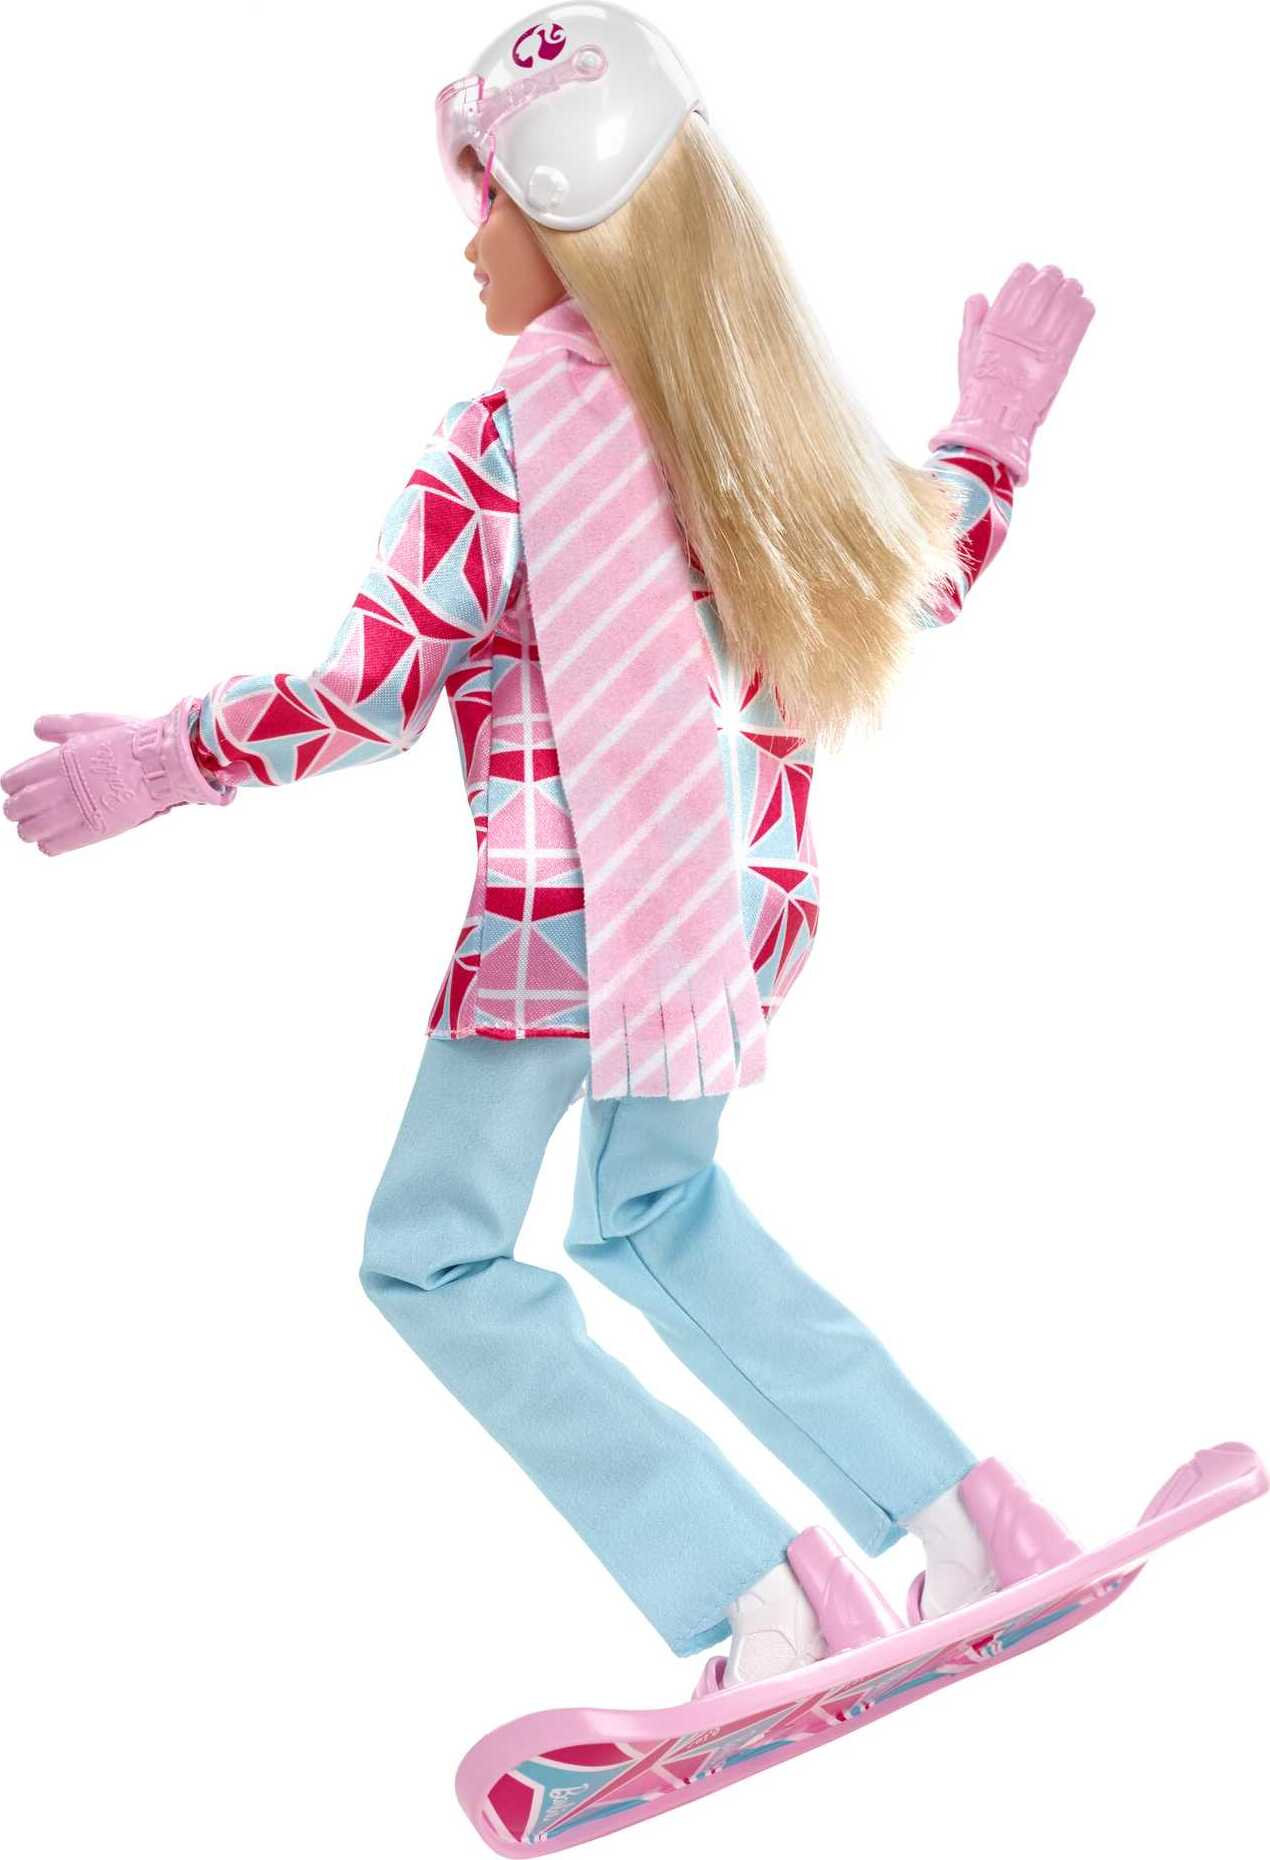 Barbie Snowboarder Fashion Doll Dressed in Jacket, Pants & Helmet, with Blonde Hair - image 4 of 6